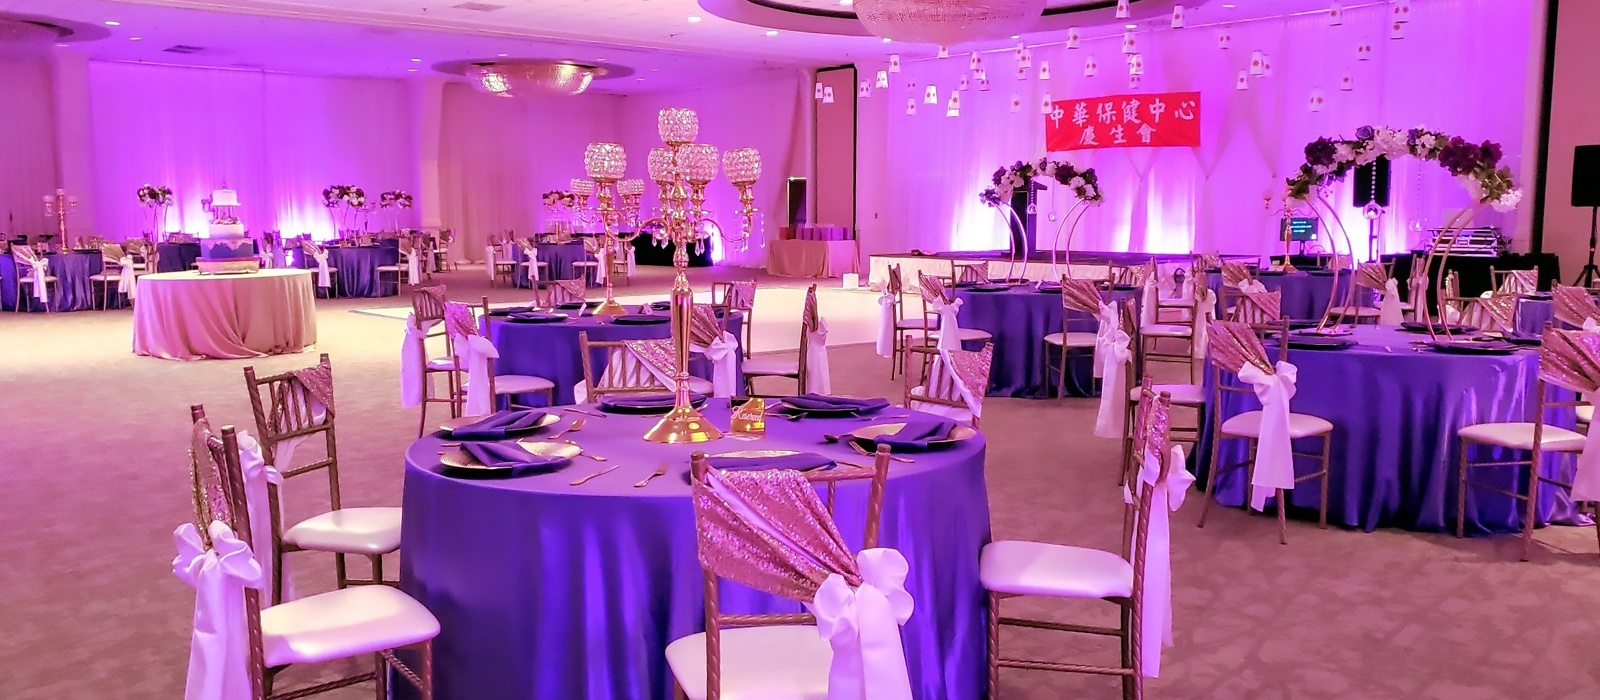 Signature Manor will make your special day come to life with Top Quality Wedding Venue in Houston